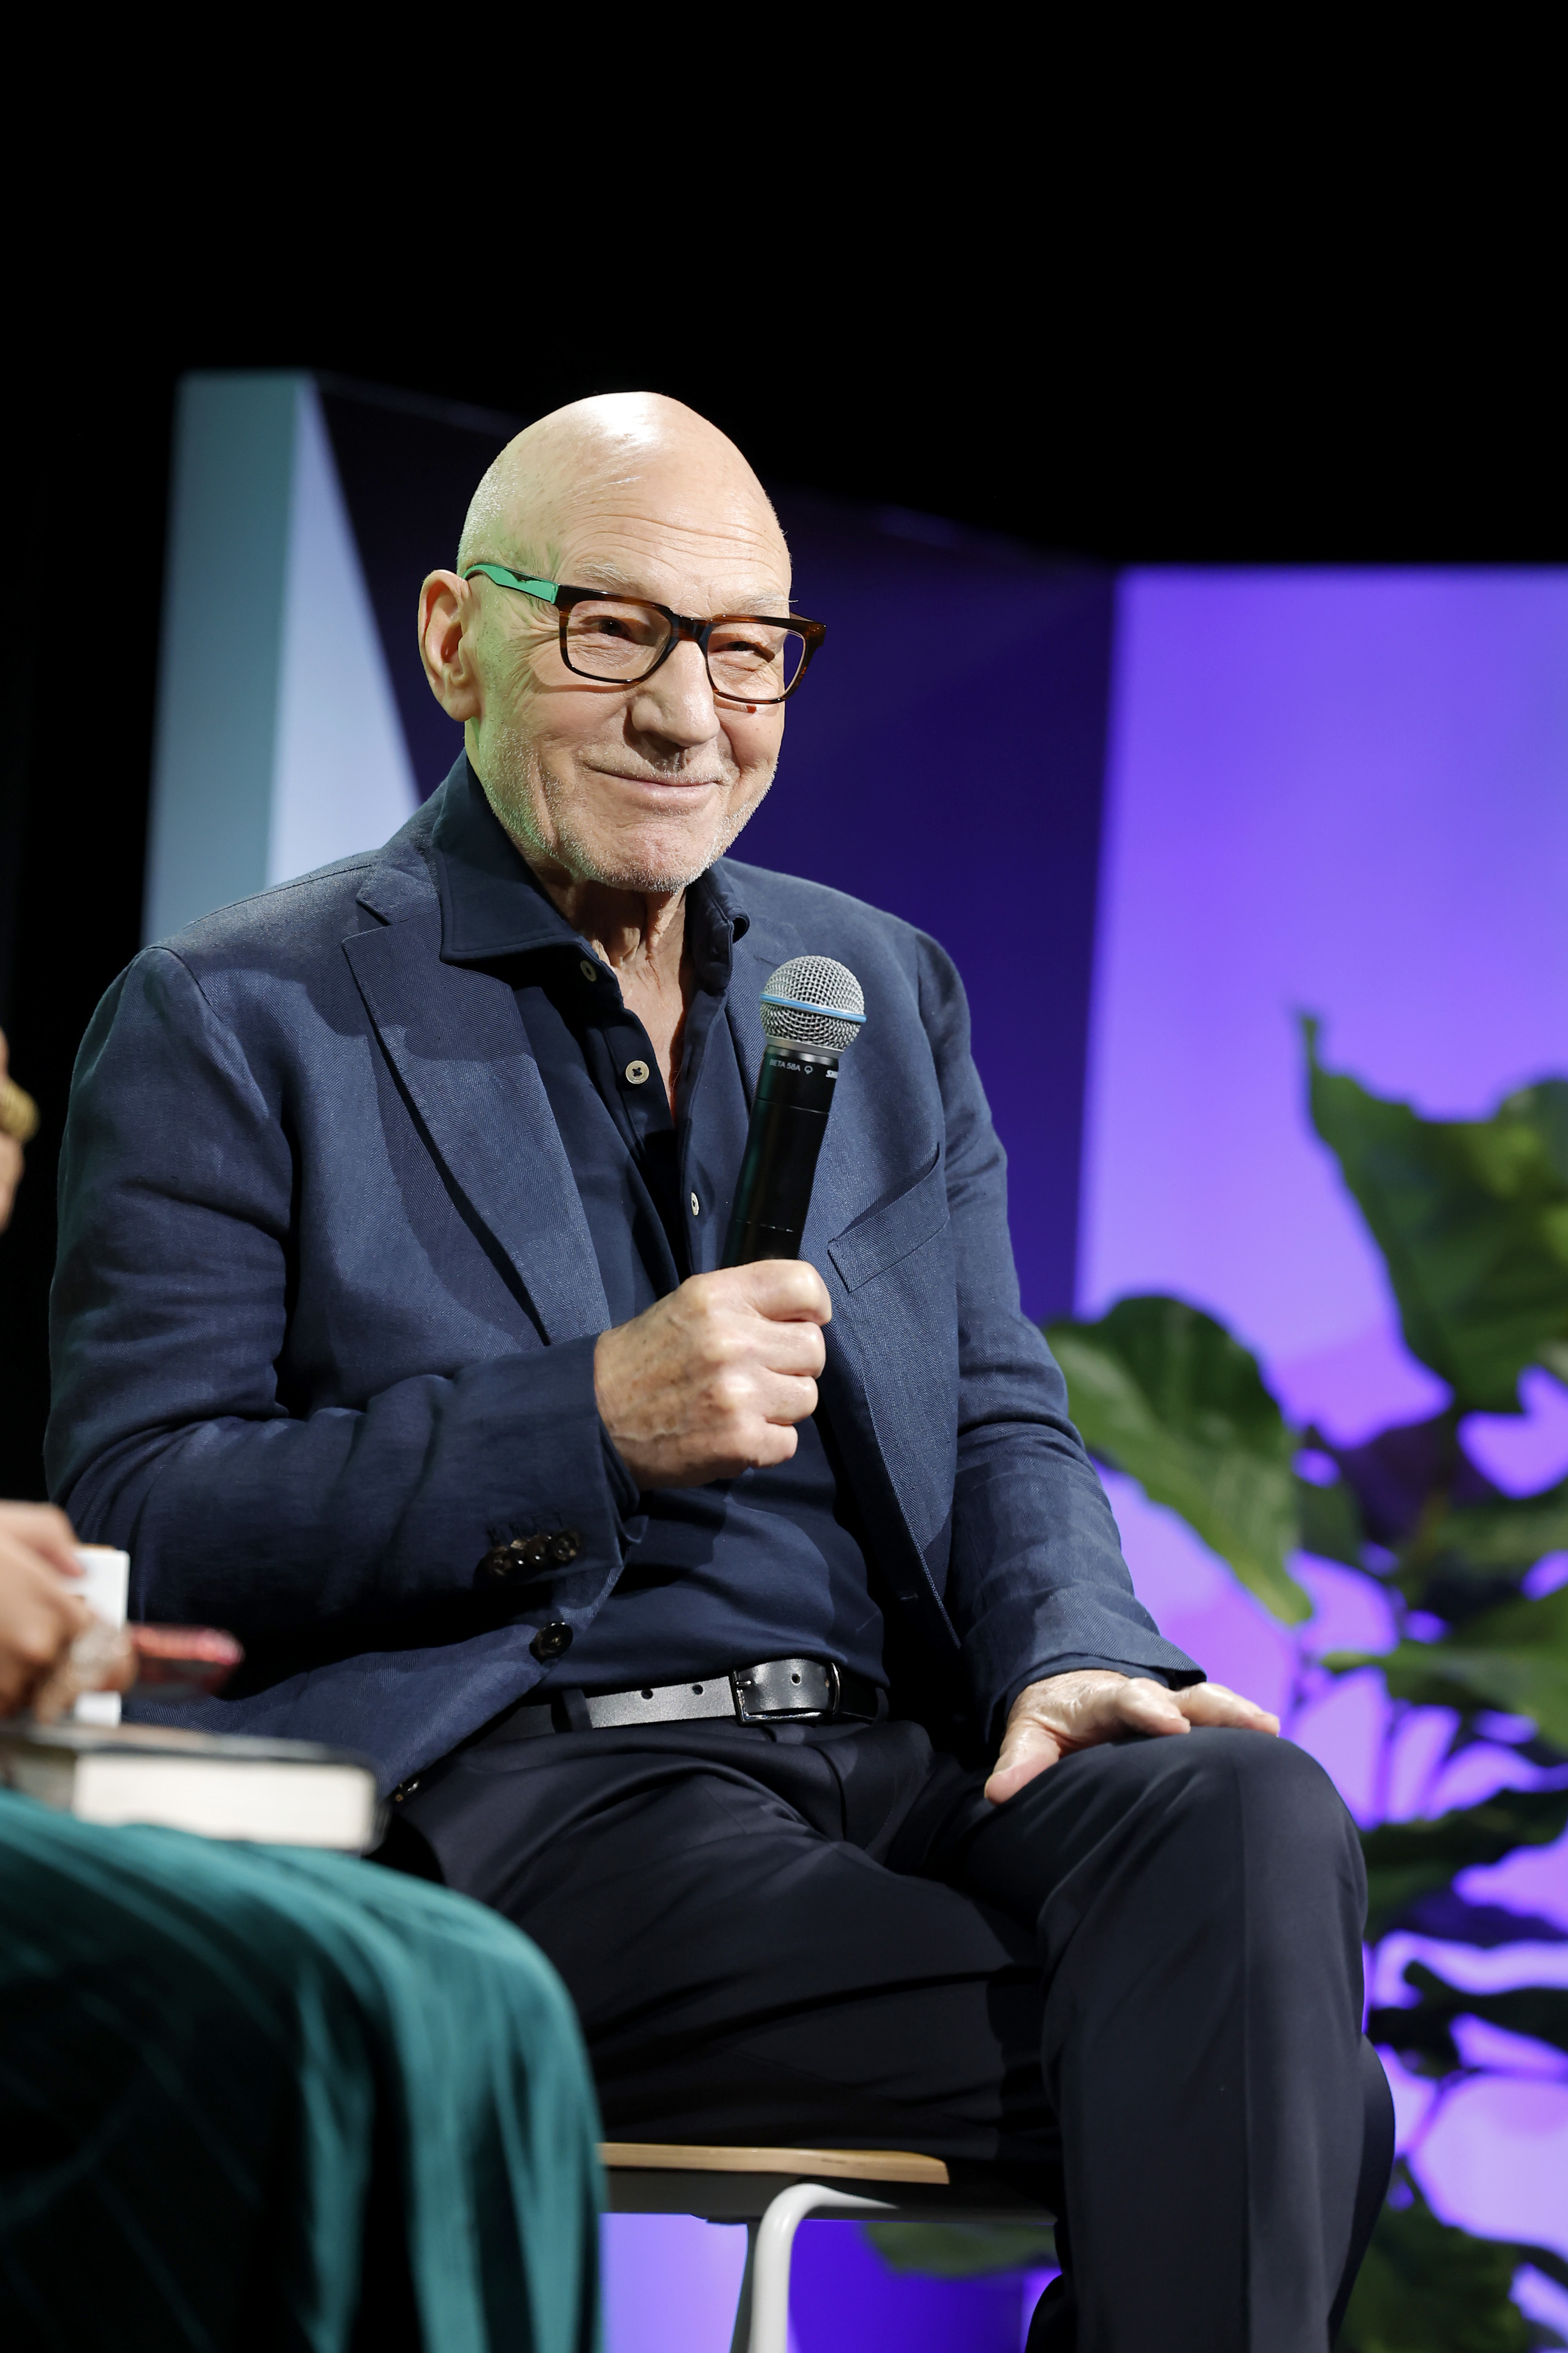 Patrick Stewart in a blazer with a microphone seated on stage, smiling